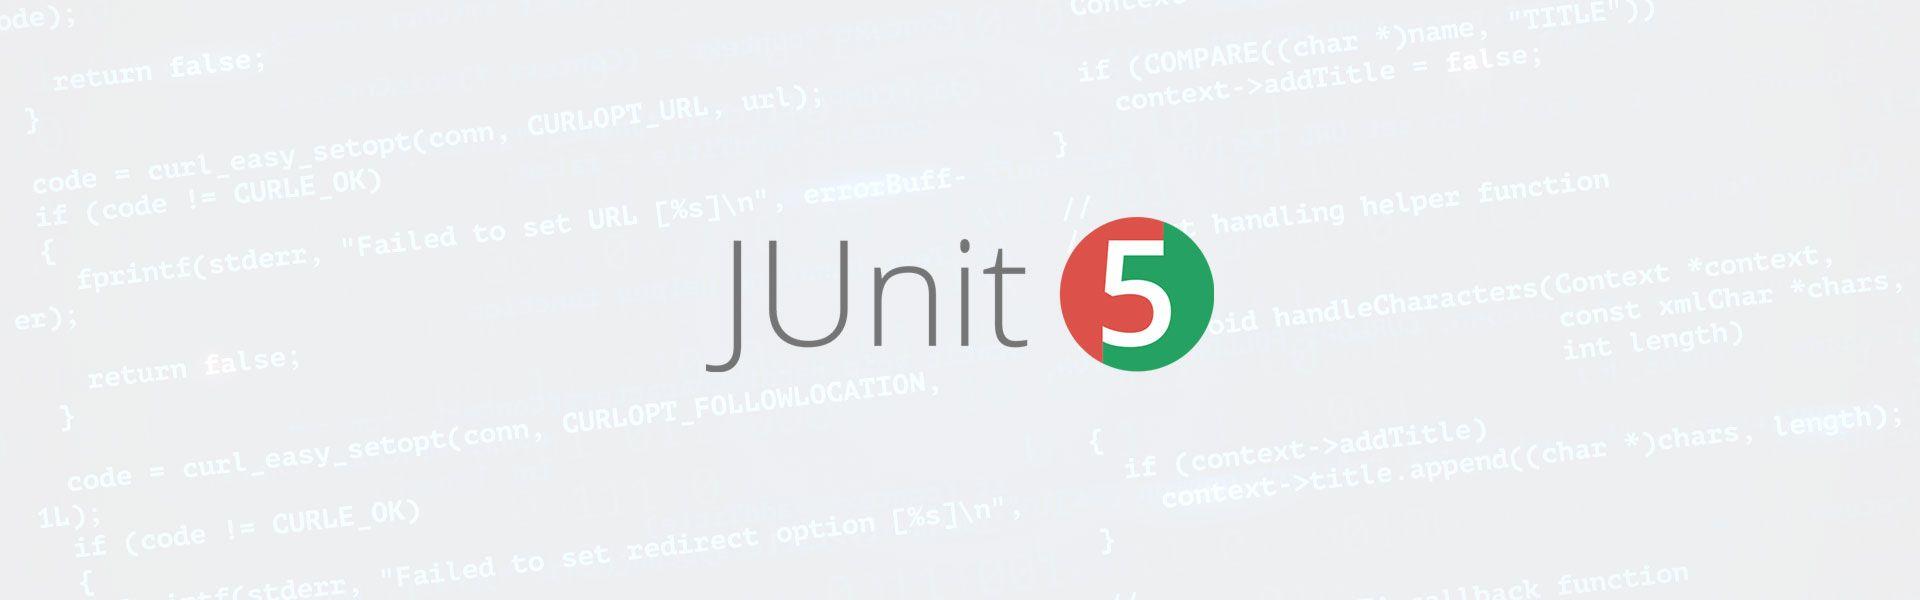 JUnit Logo - What's So Great About JUnit 5? | TestProject